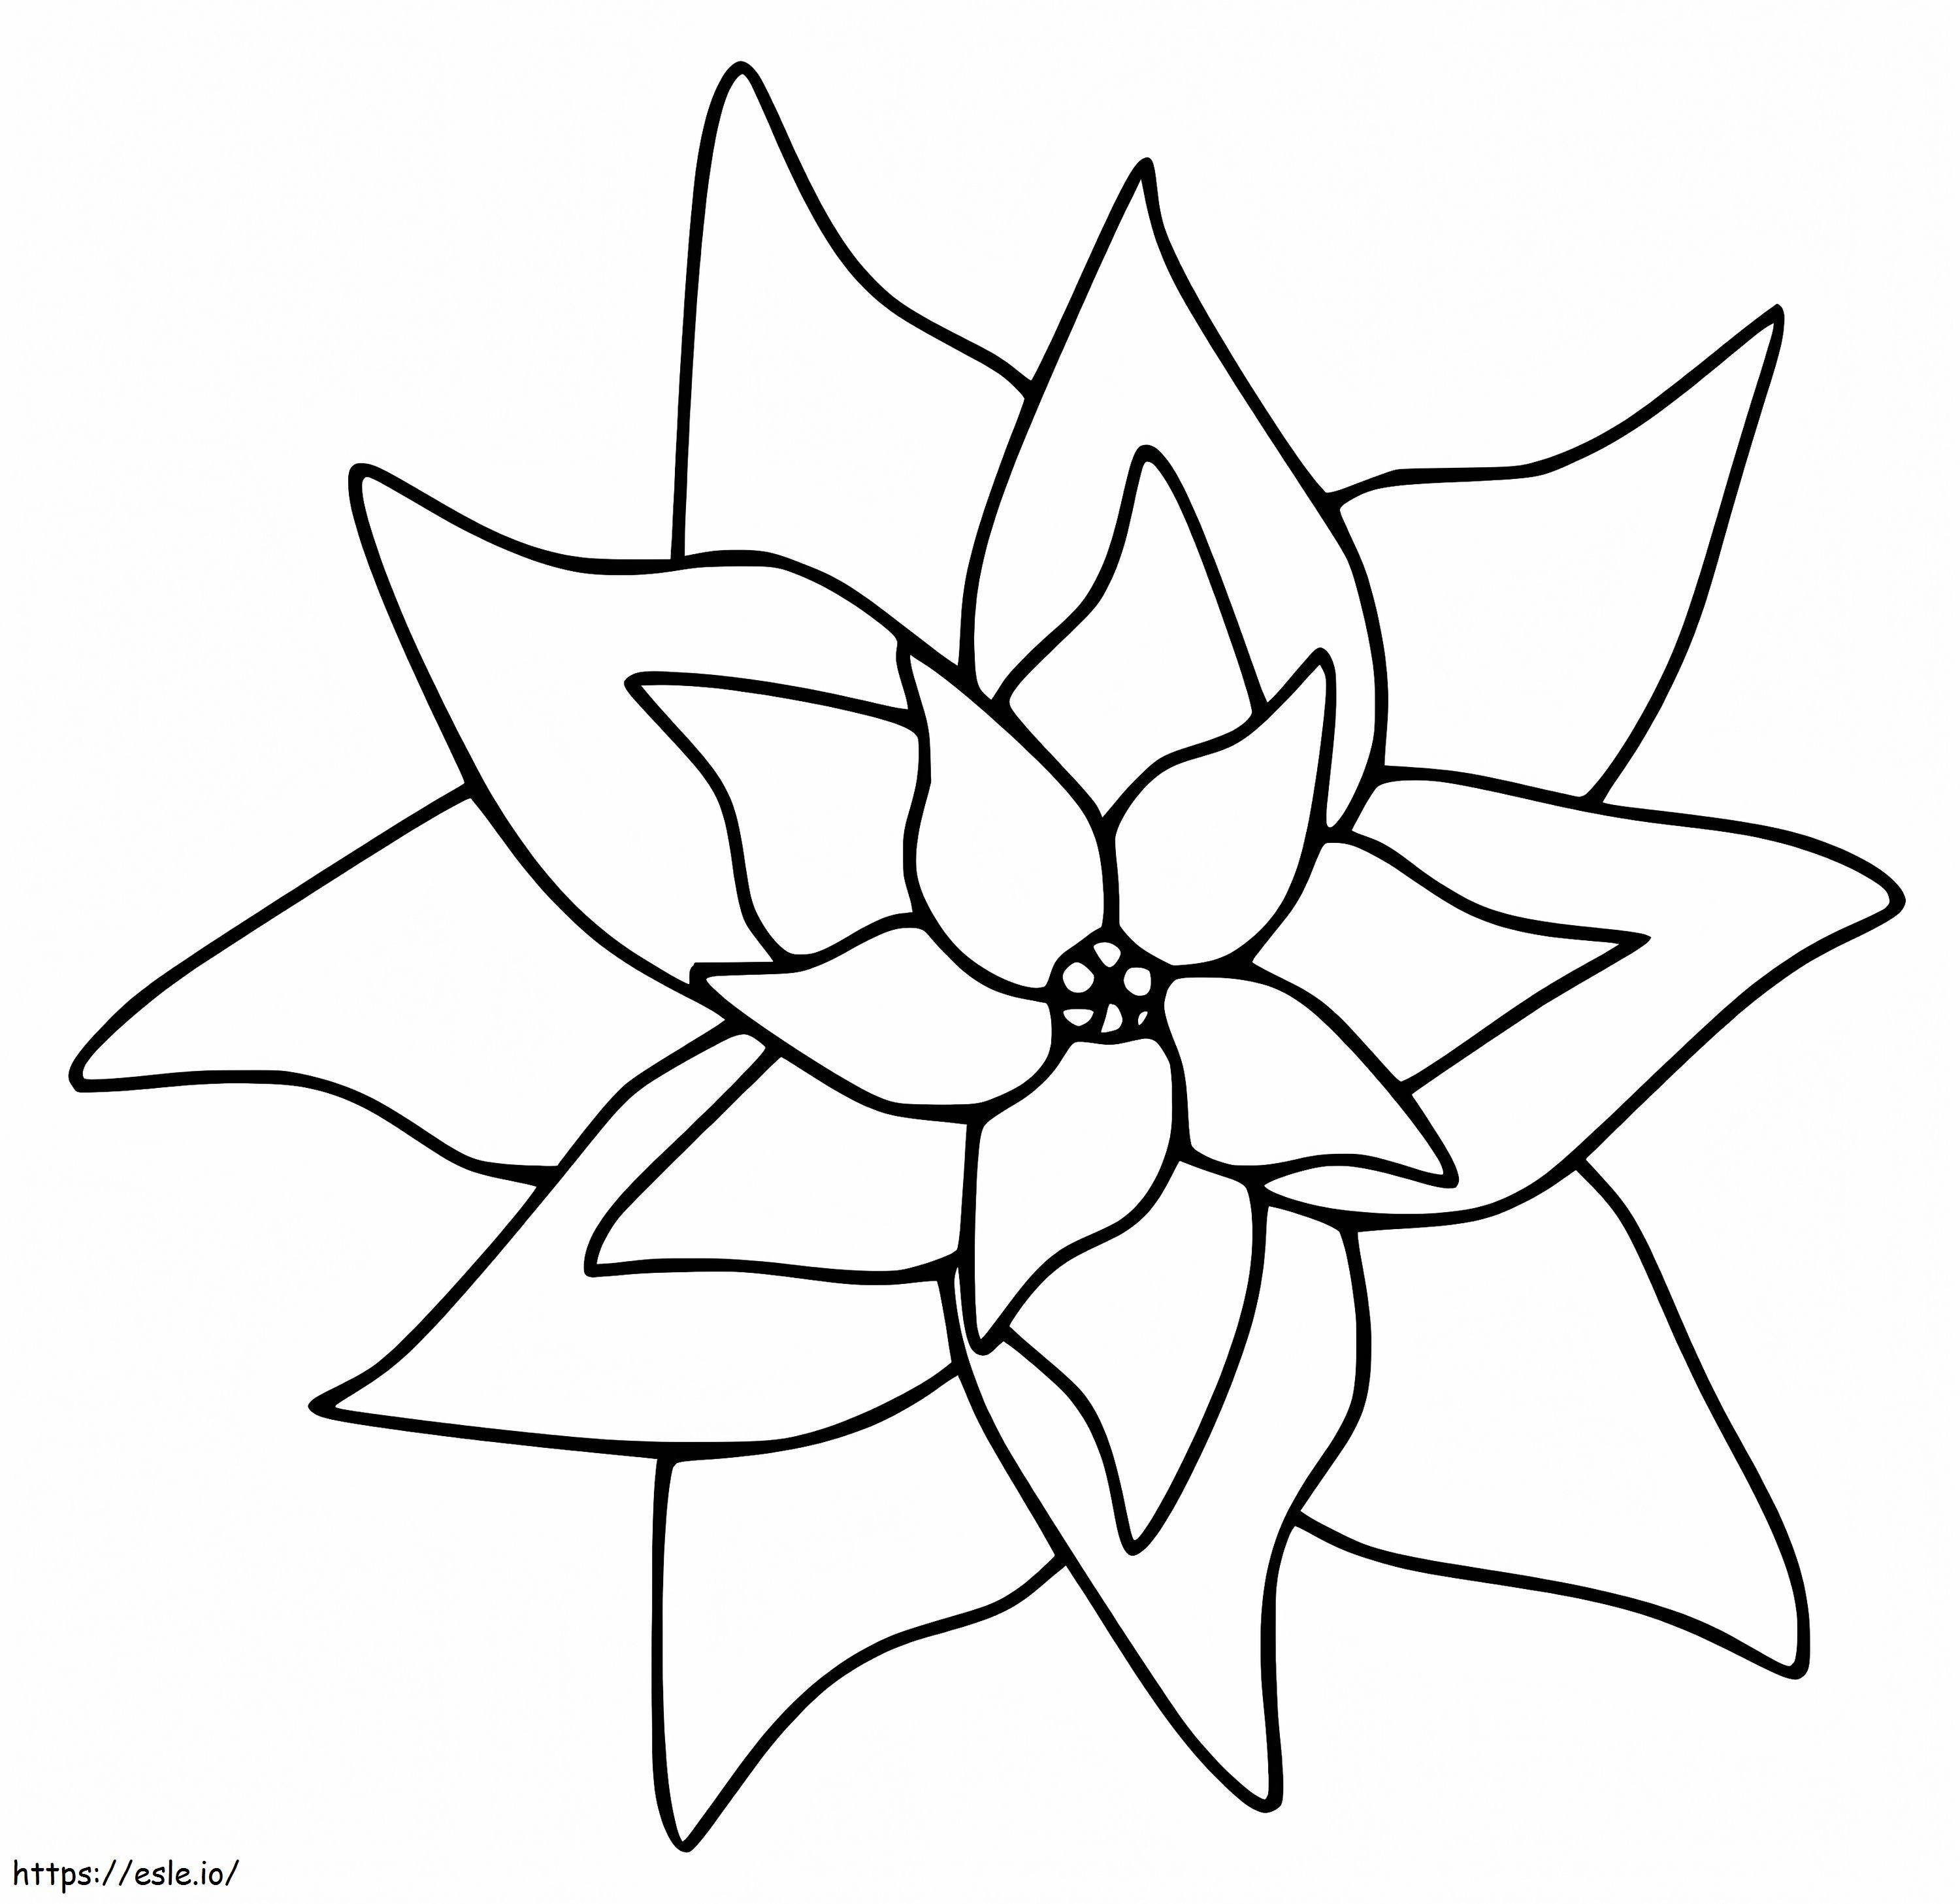 Easy Poinsettia coloring page